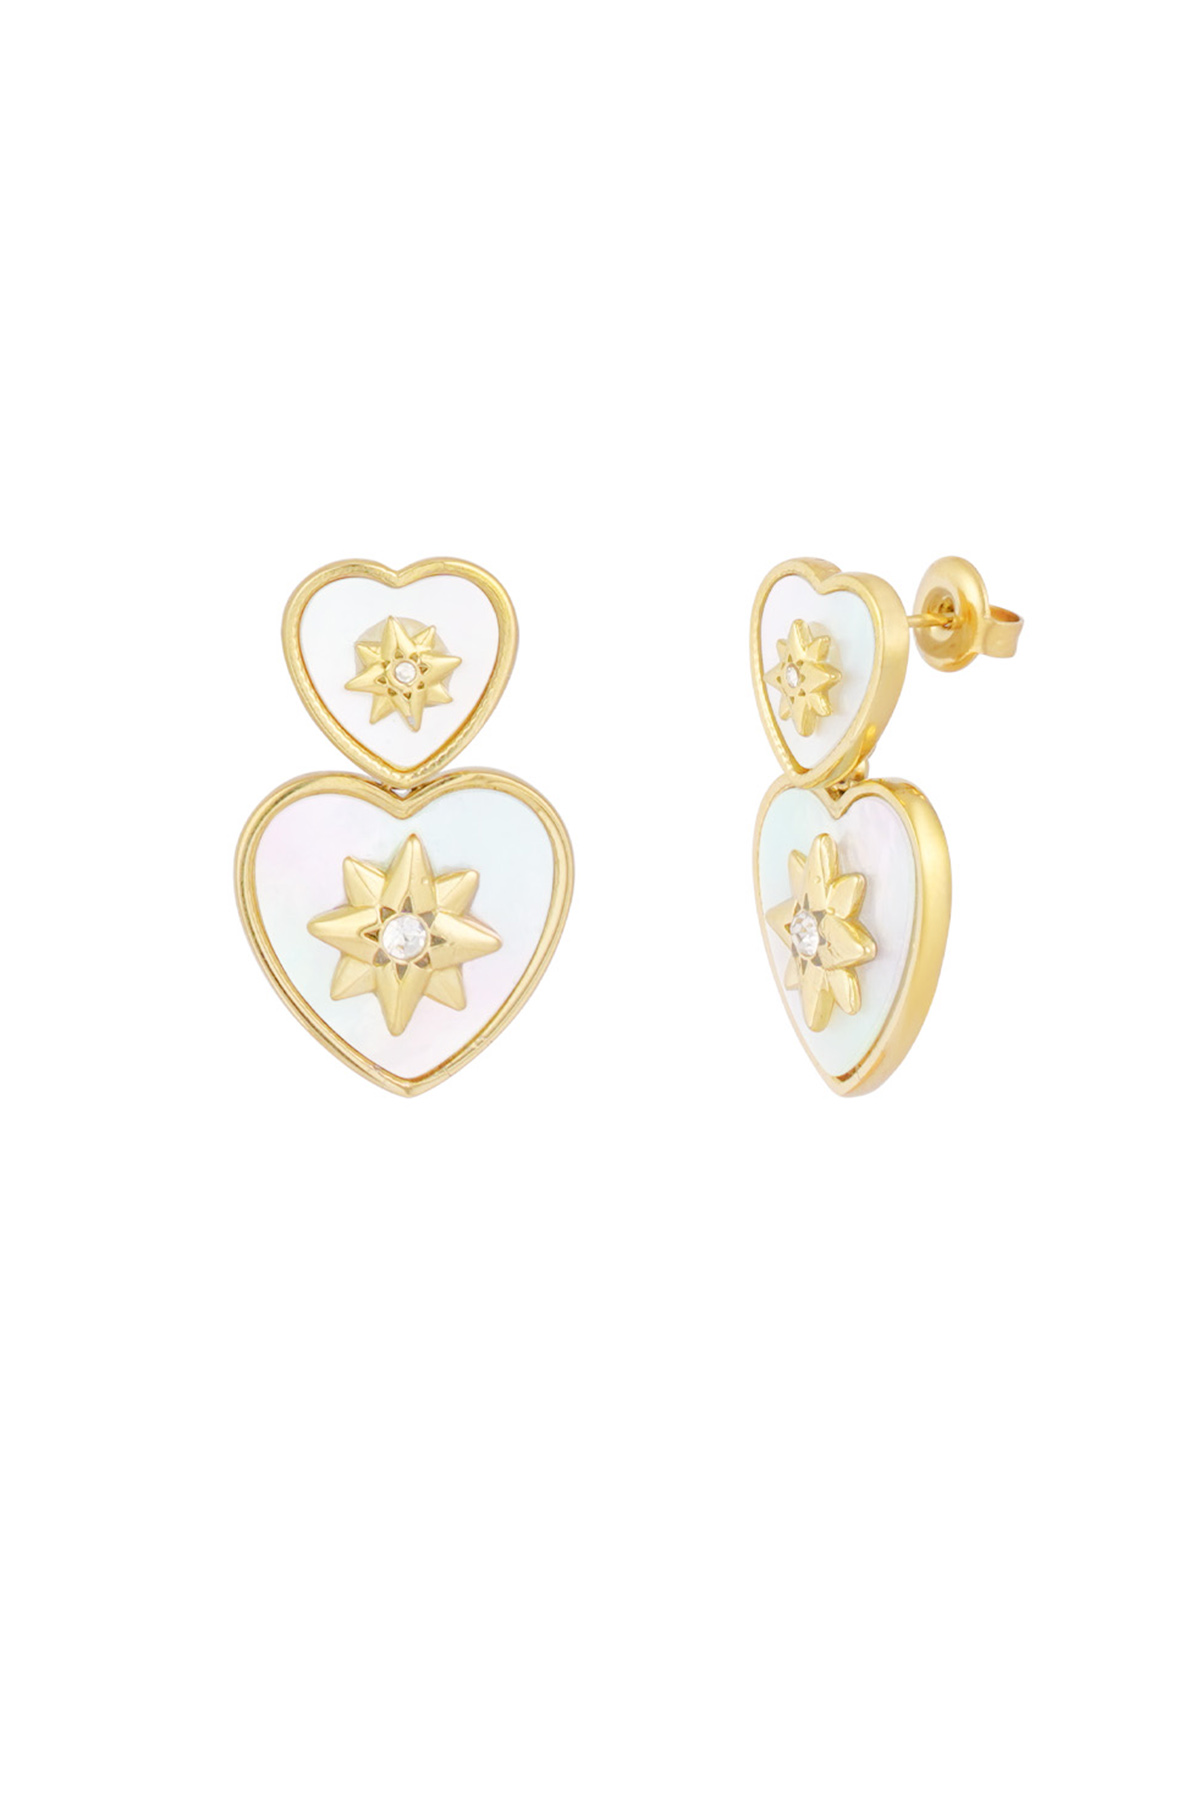 Heart earrings with star - white gold h5 